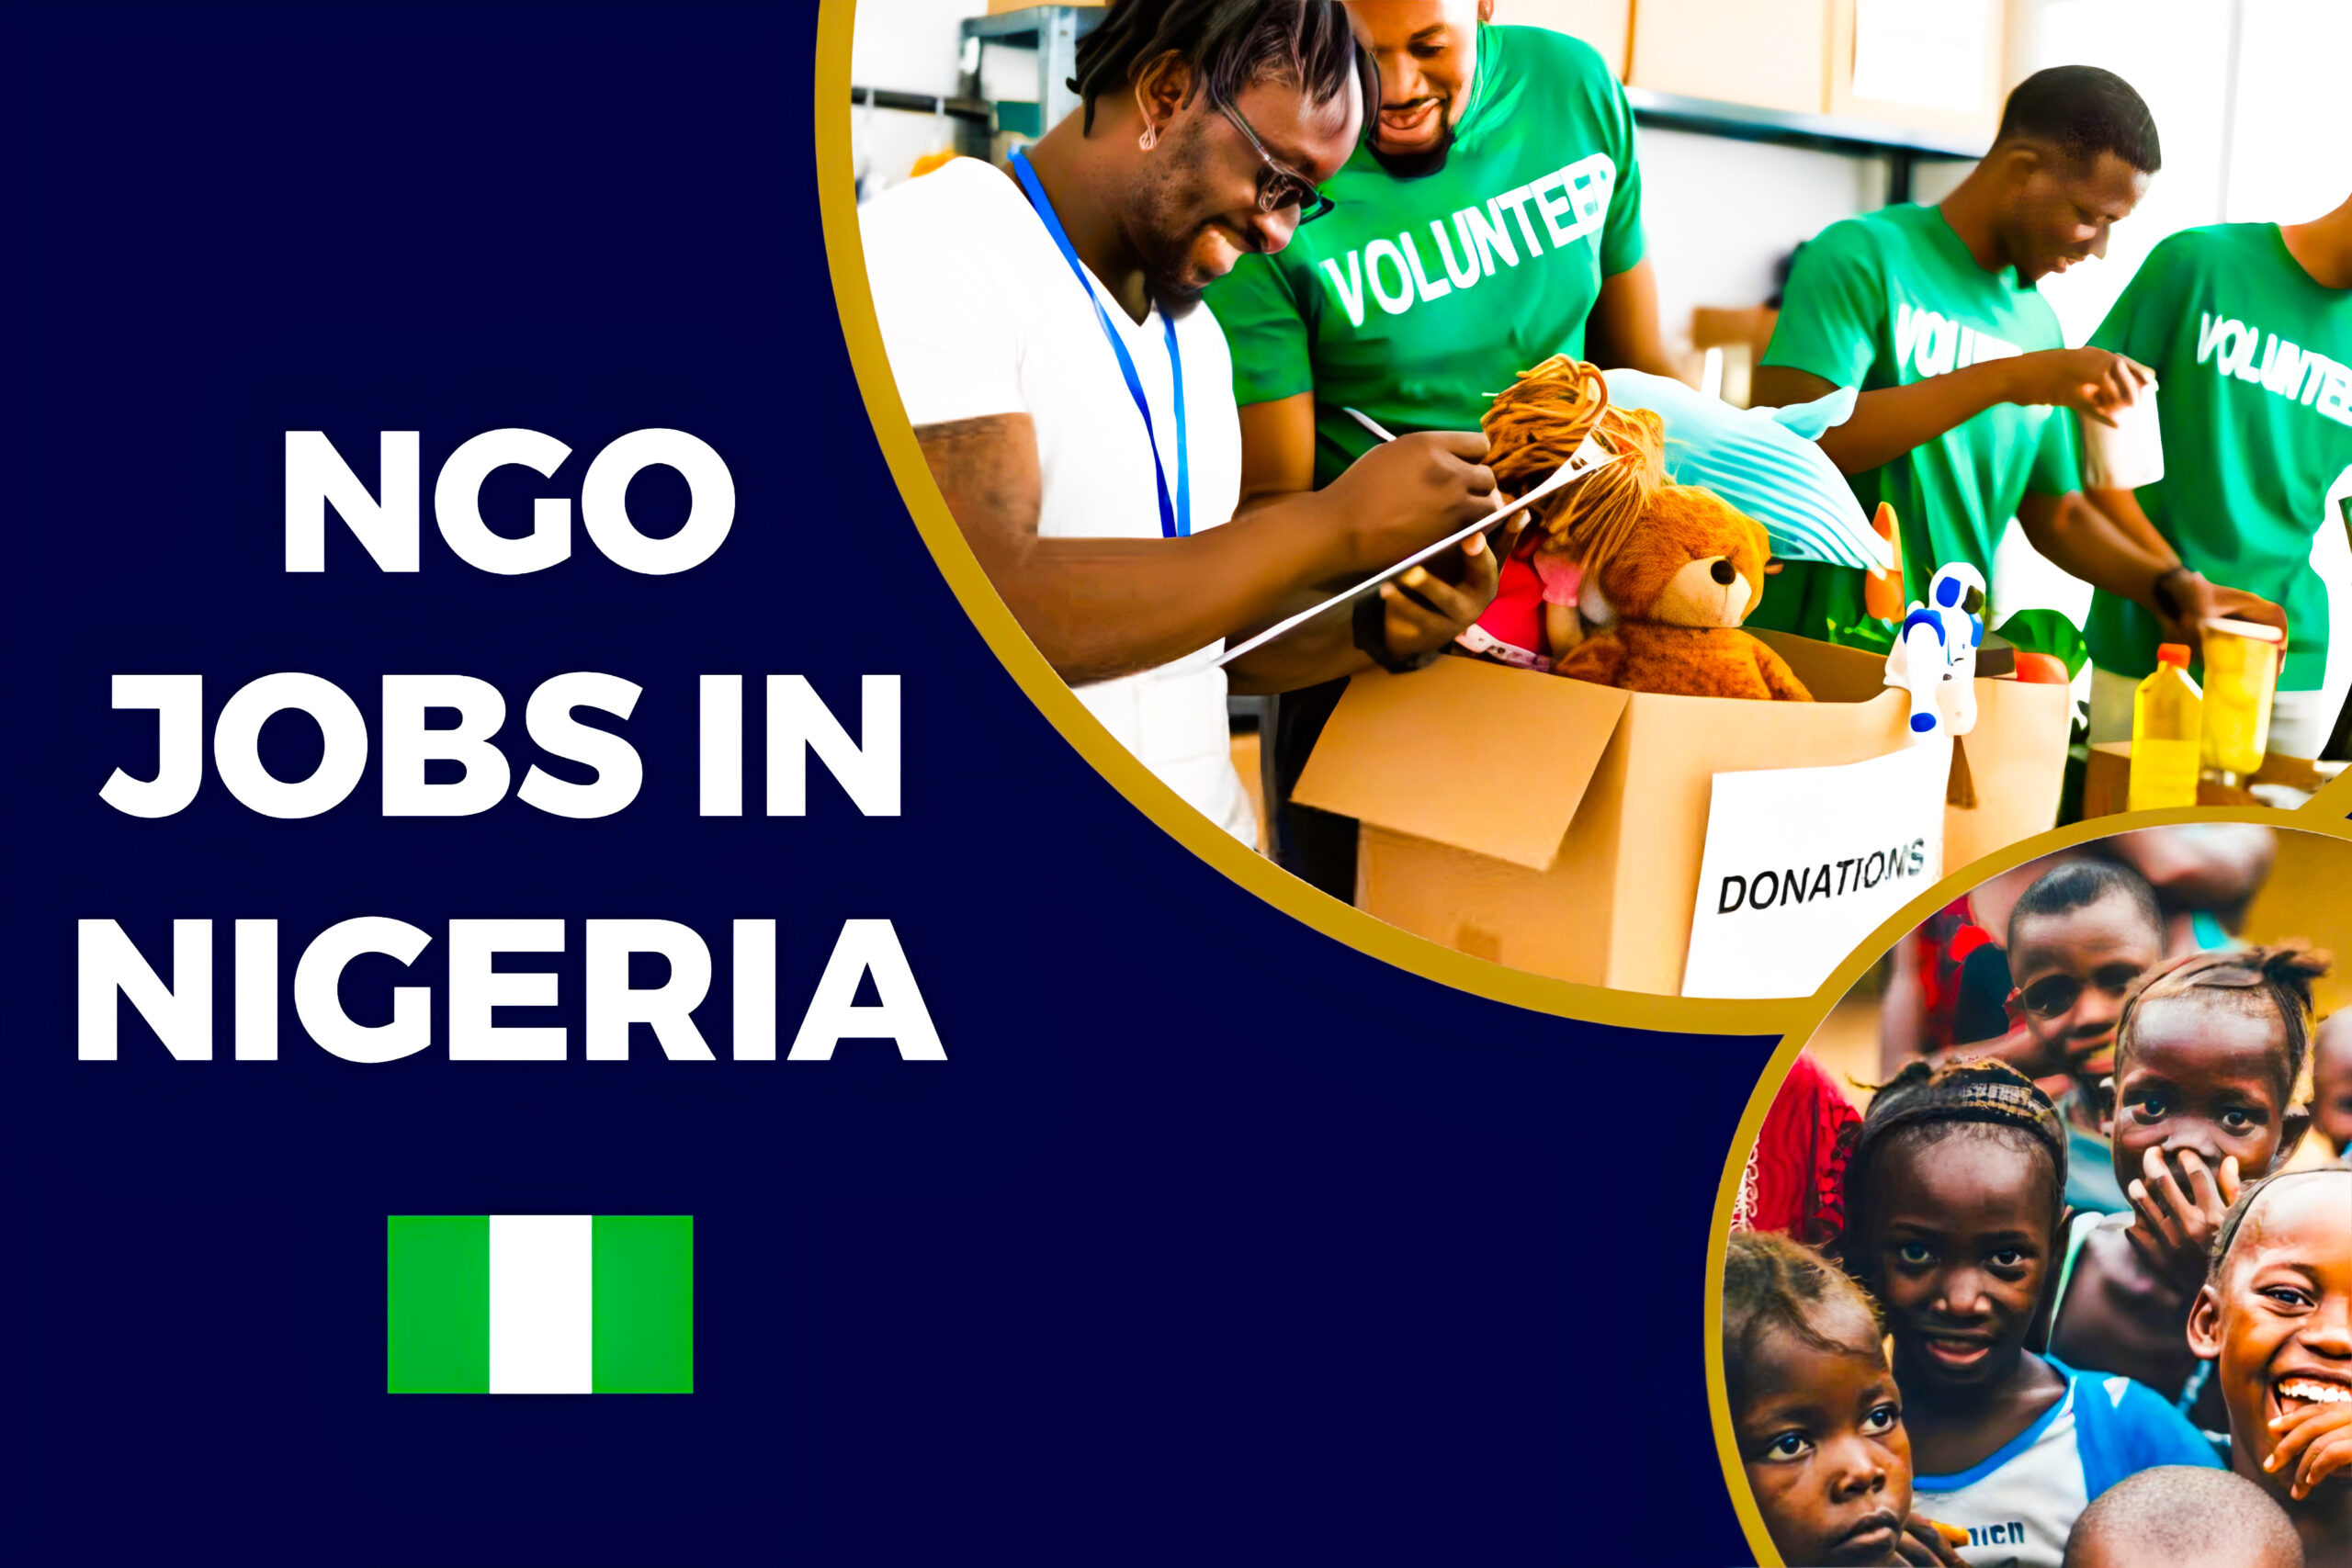 NGO Jobs In Nigeria - 8 Roles NGOs Can Take Up In The Society